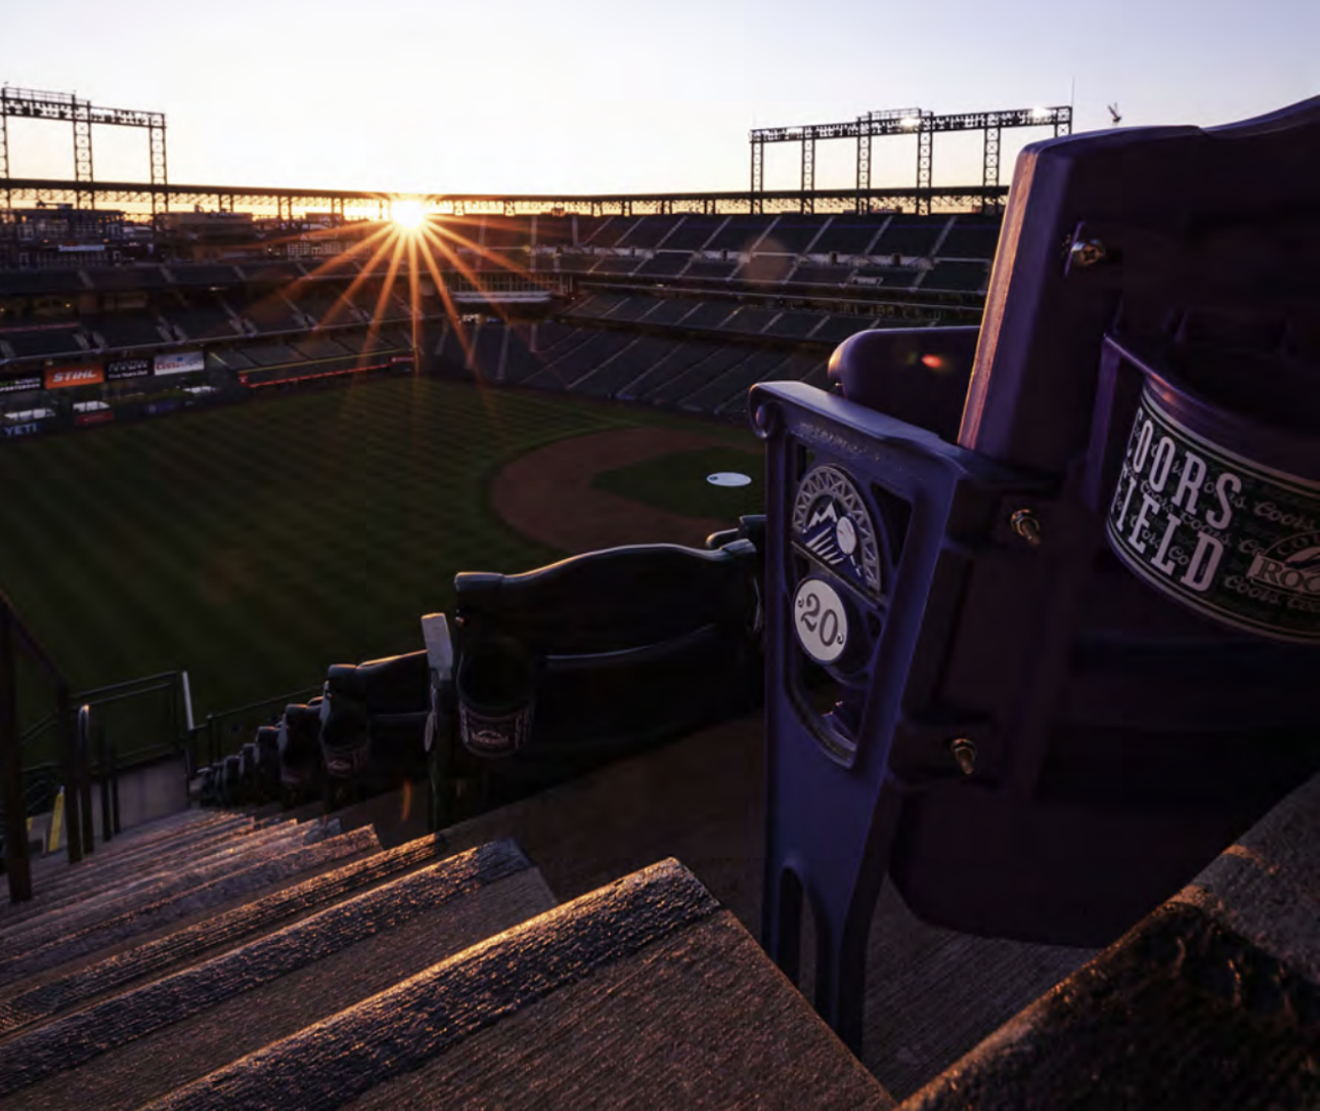 Betting insiders believe the Colorado Rockies are going to deliver another season-long slopfest at Coors Field this year.